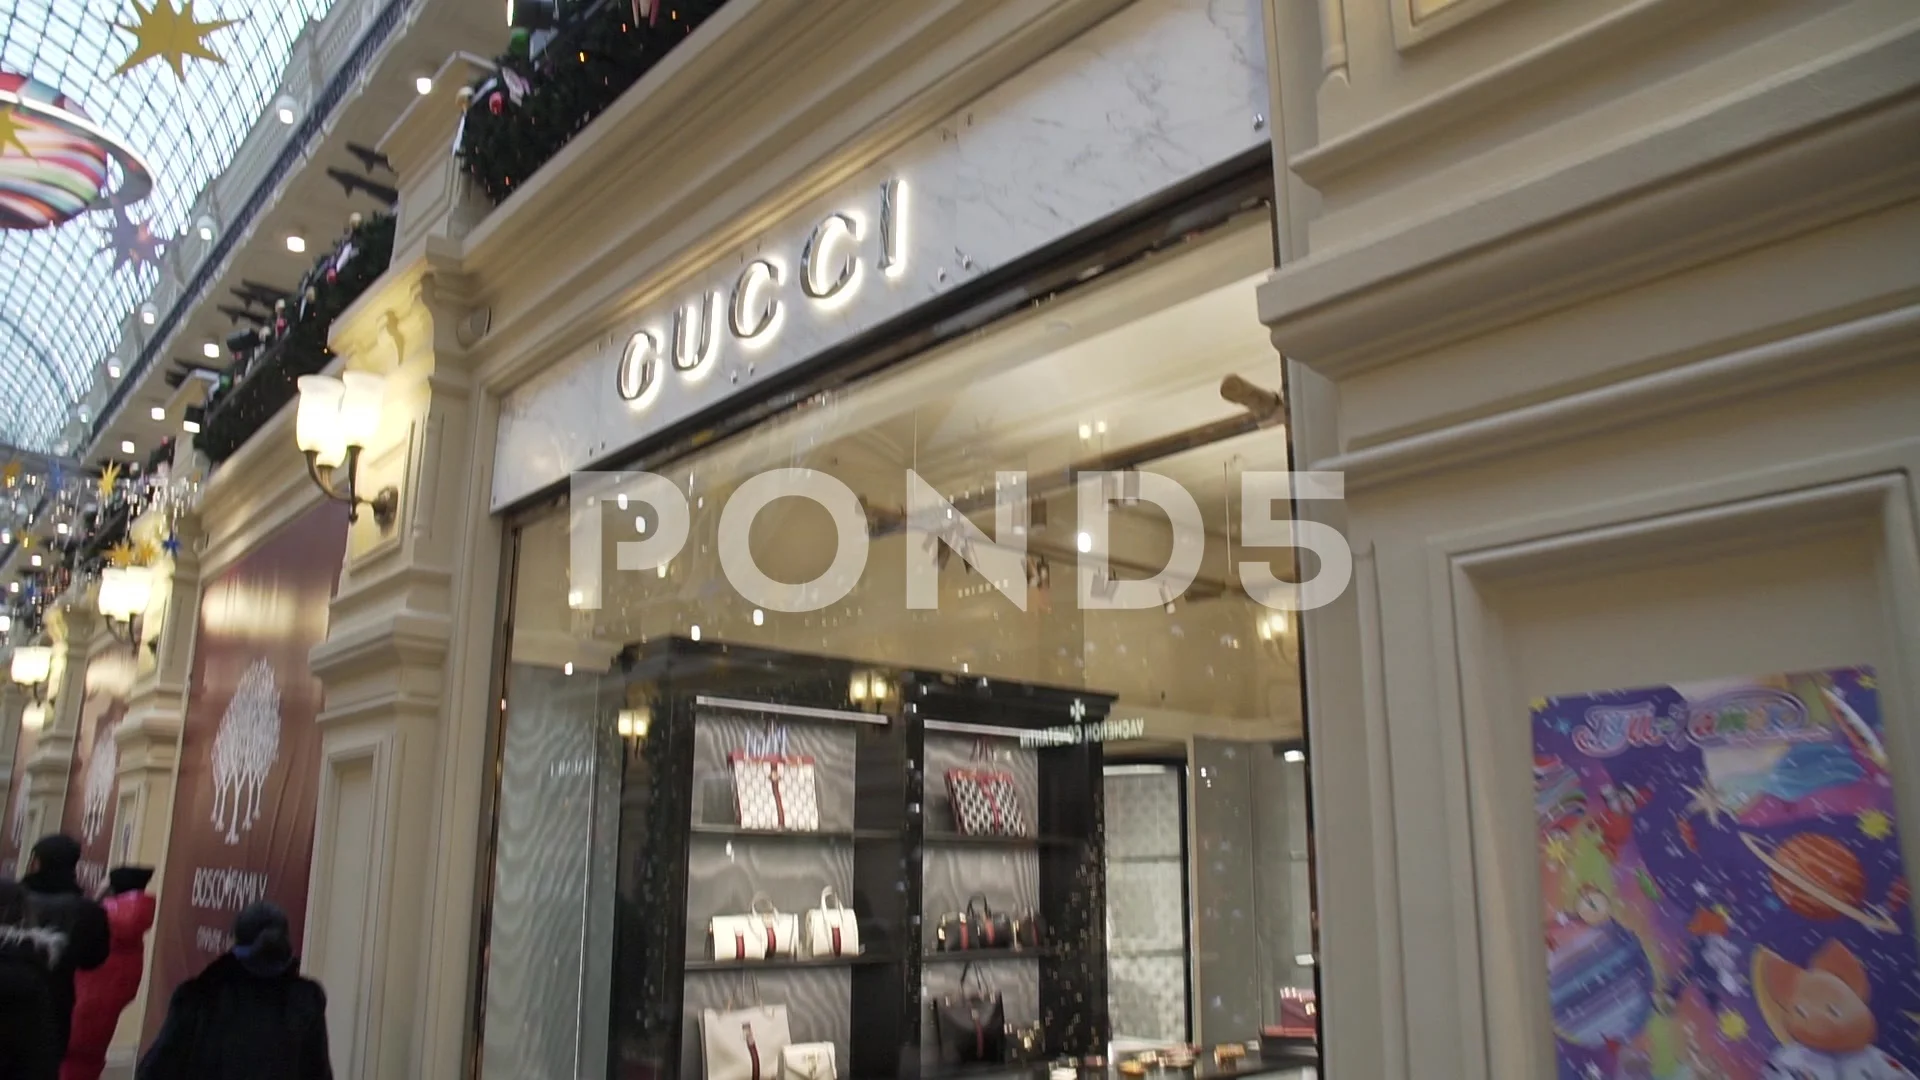 Gucci shop on Rodeo drive  Stock Photos ~ Creative Market